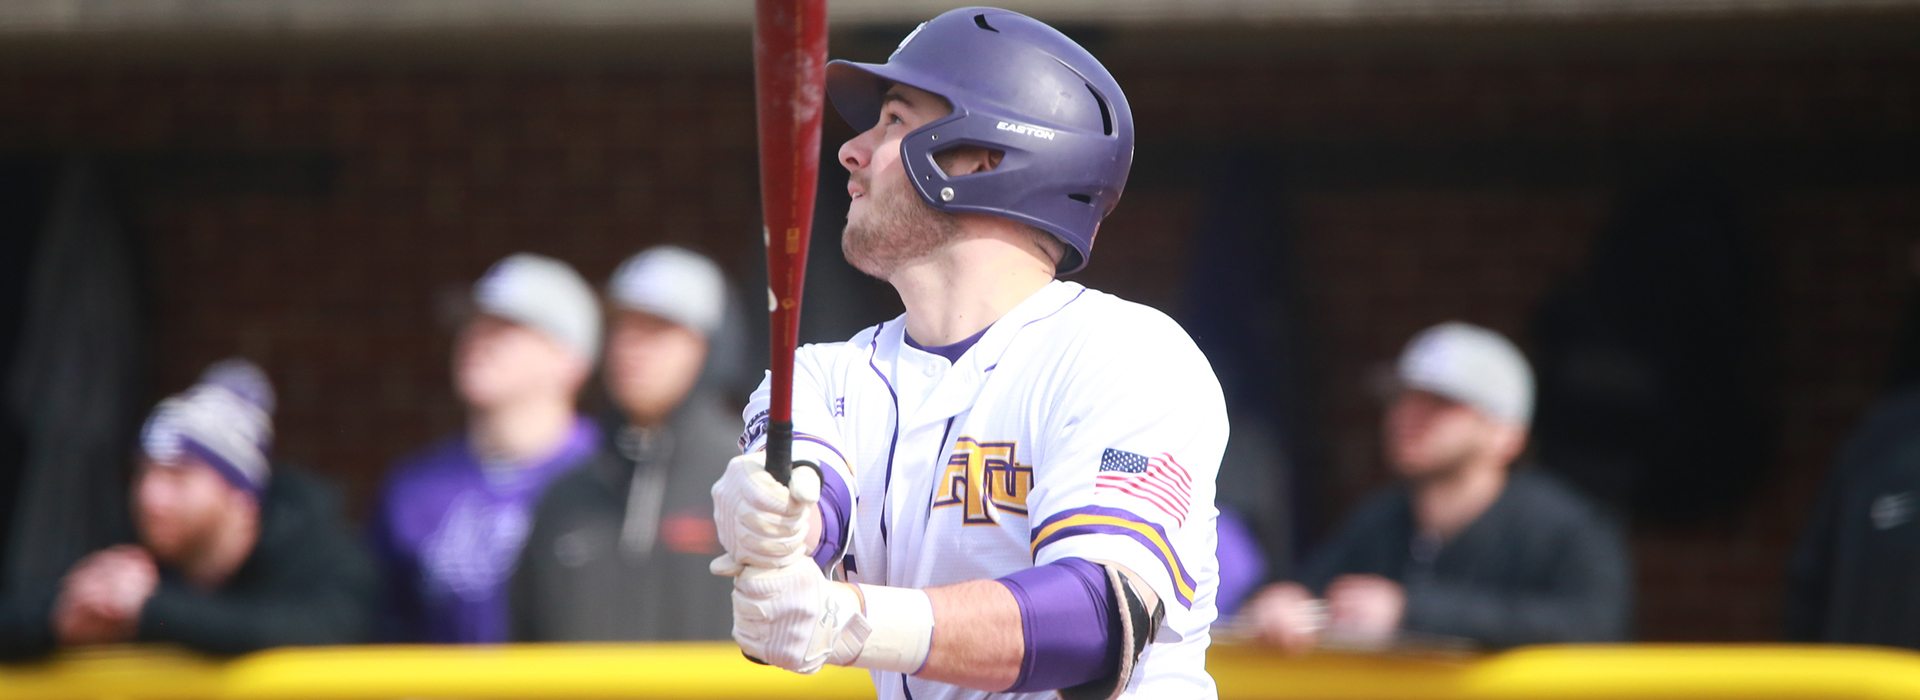 Patience at the plate pays off in Tech victory over Radford